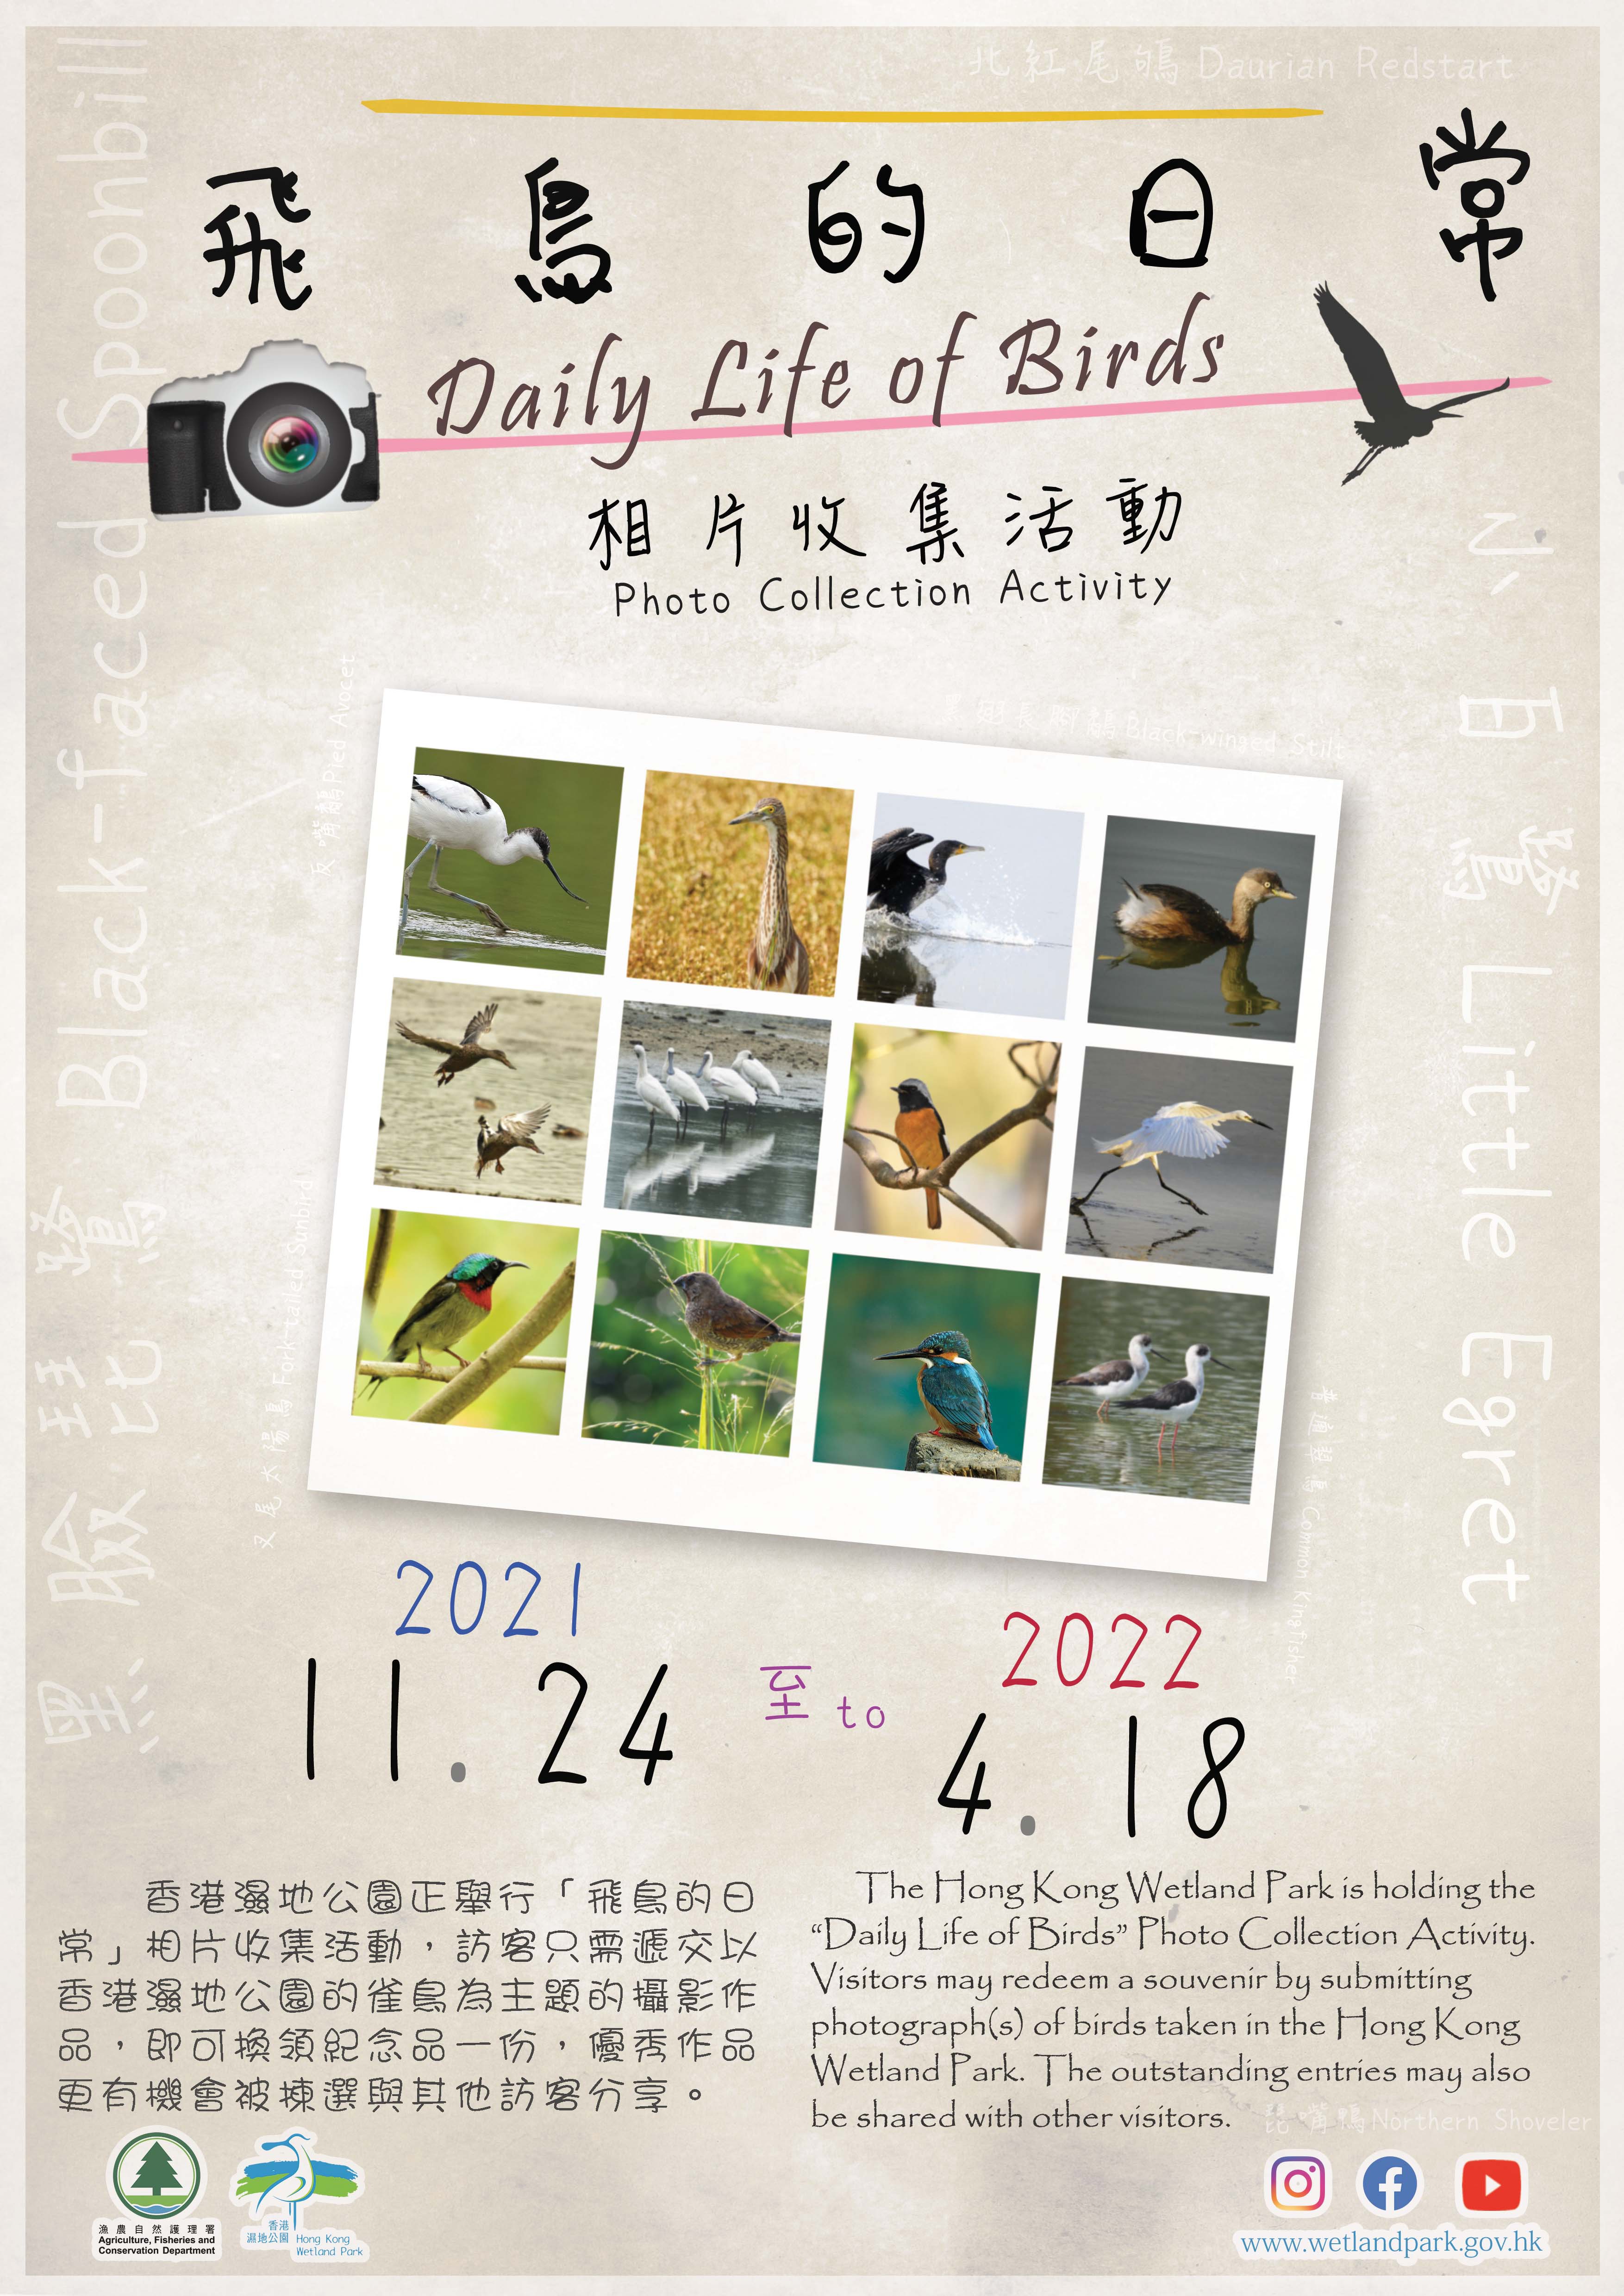 “Daily Life of Birds” Photo Collection Activity